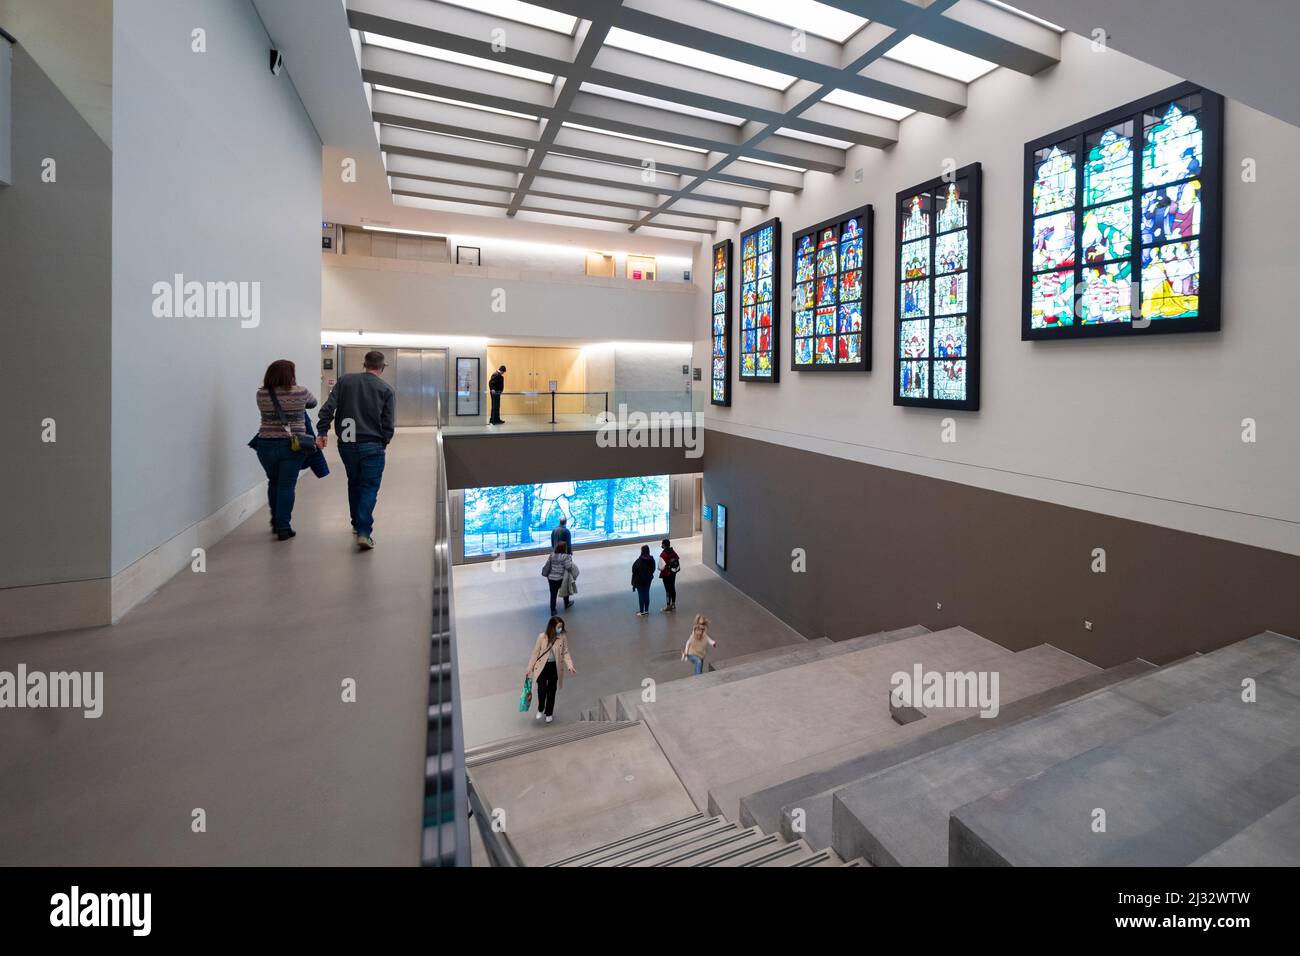 Interior of the Burrell Collection museum in Pollok Park Glasgow after it reopened following an extensive refurbishment. Scotland , UK. Stock Photo